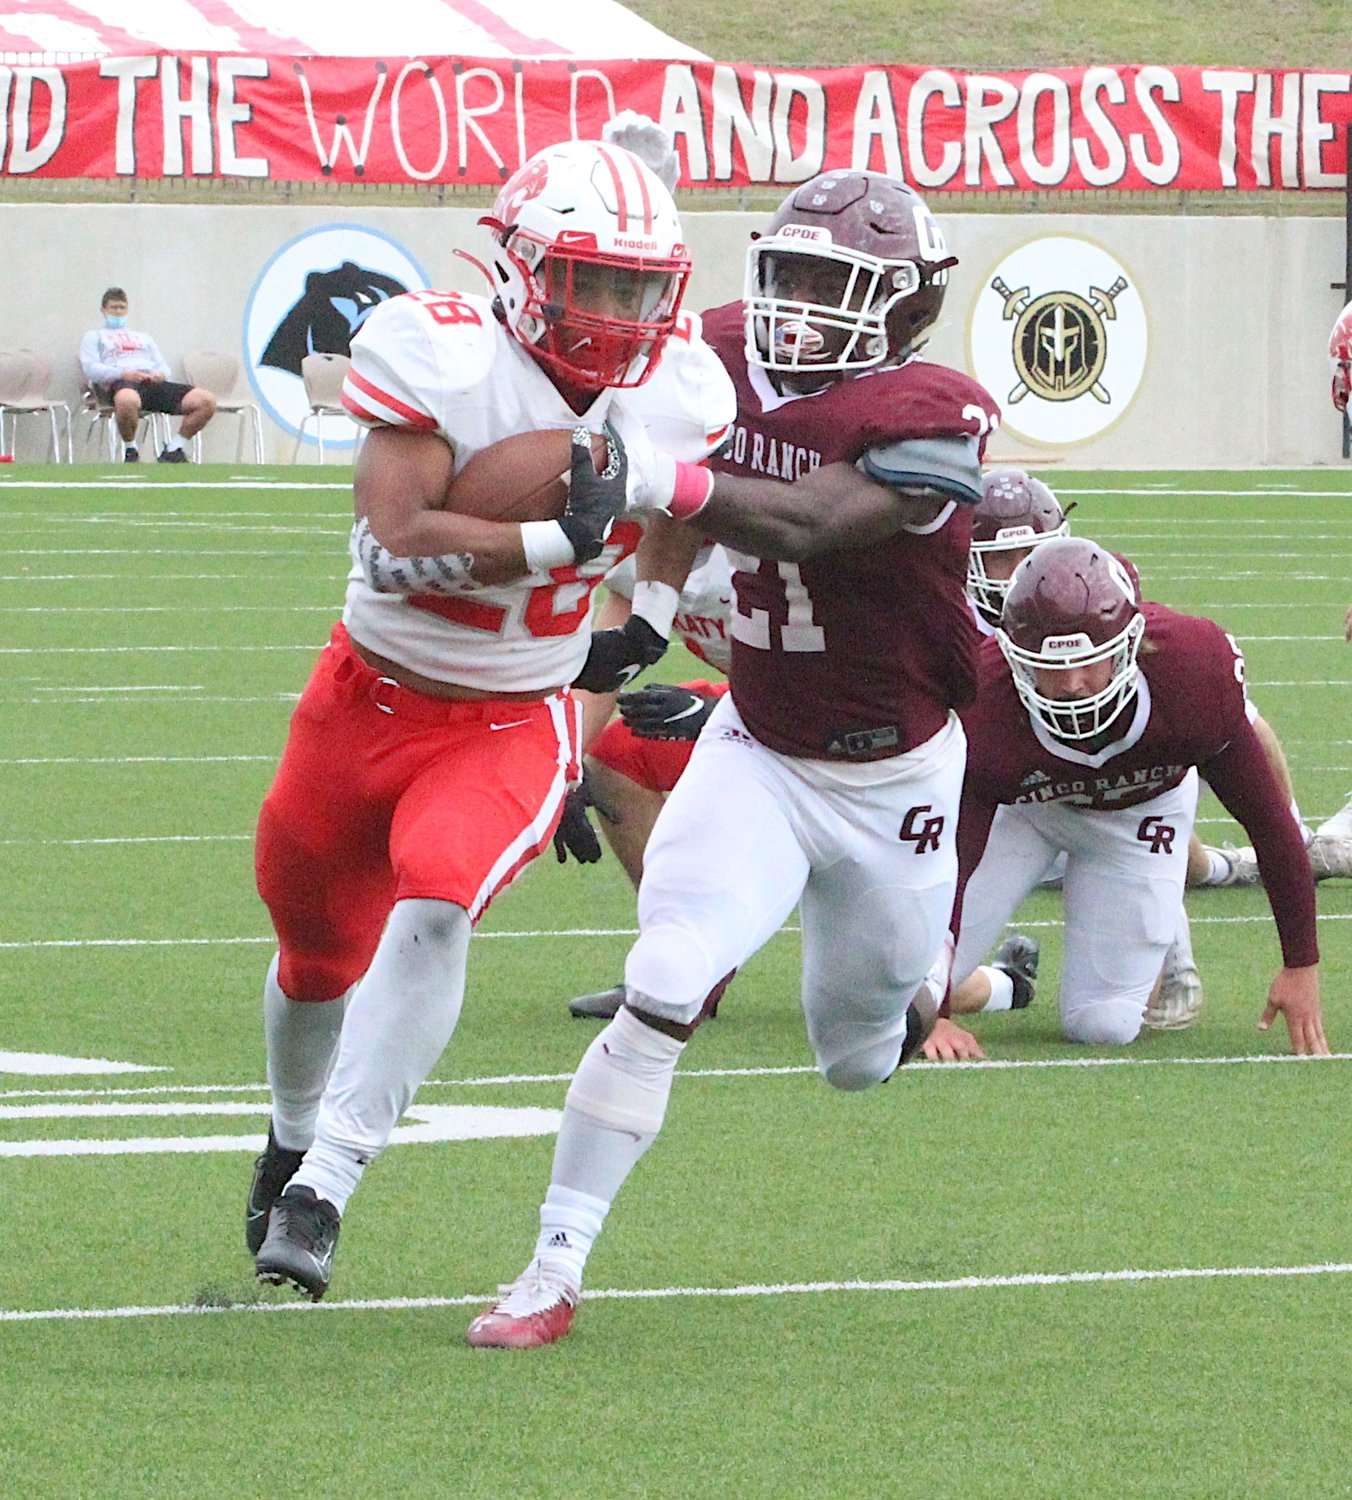 Katy High senior running back Jalen Davis breaks away from the defense during a game against Cinco Ranch on Oct. 24 at Legacy Stadium